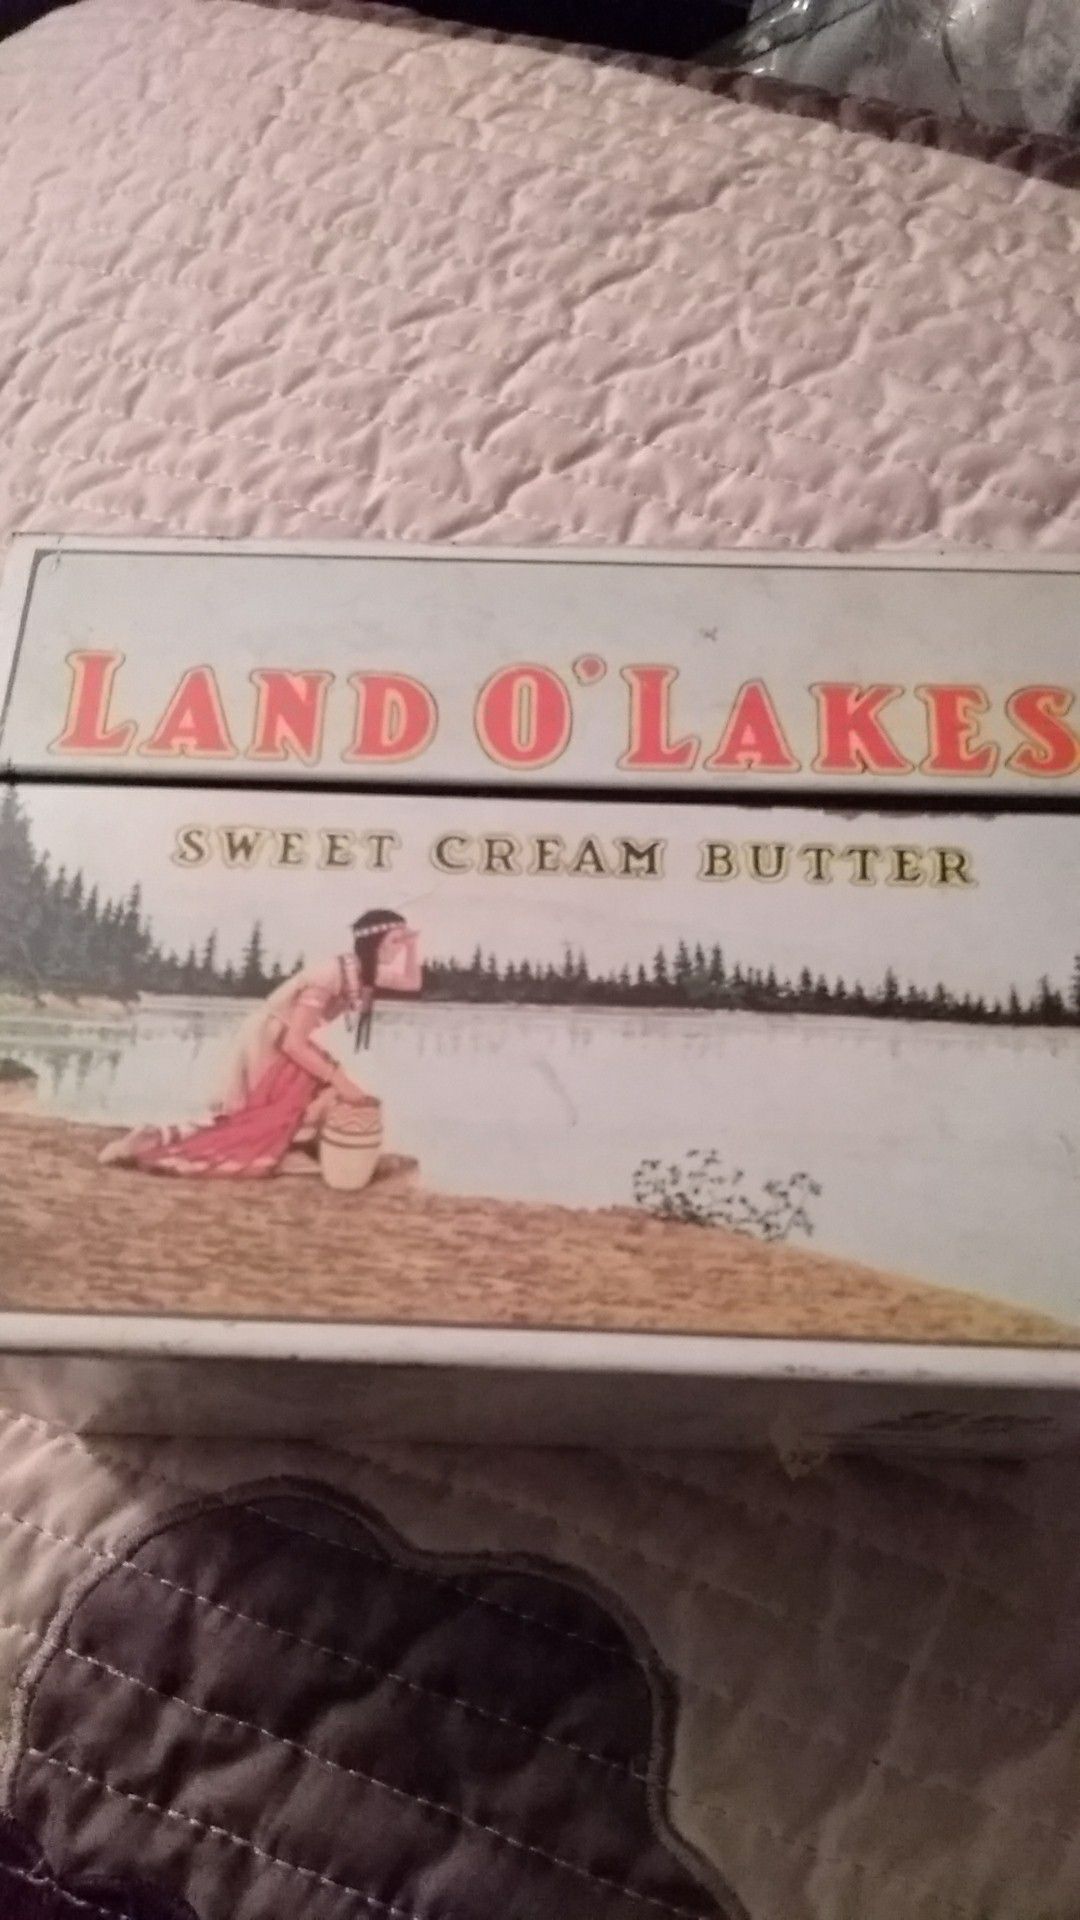 It's a recipe box made by Land O Lakes the recipes in it made by Land O Lakes